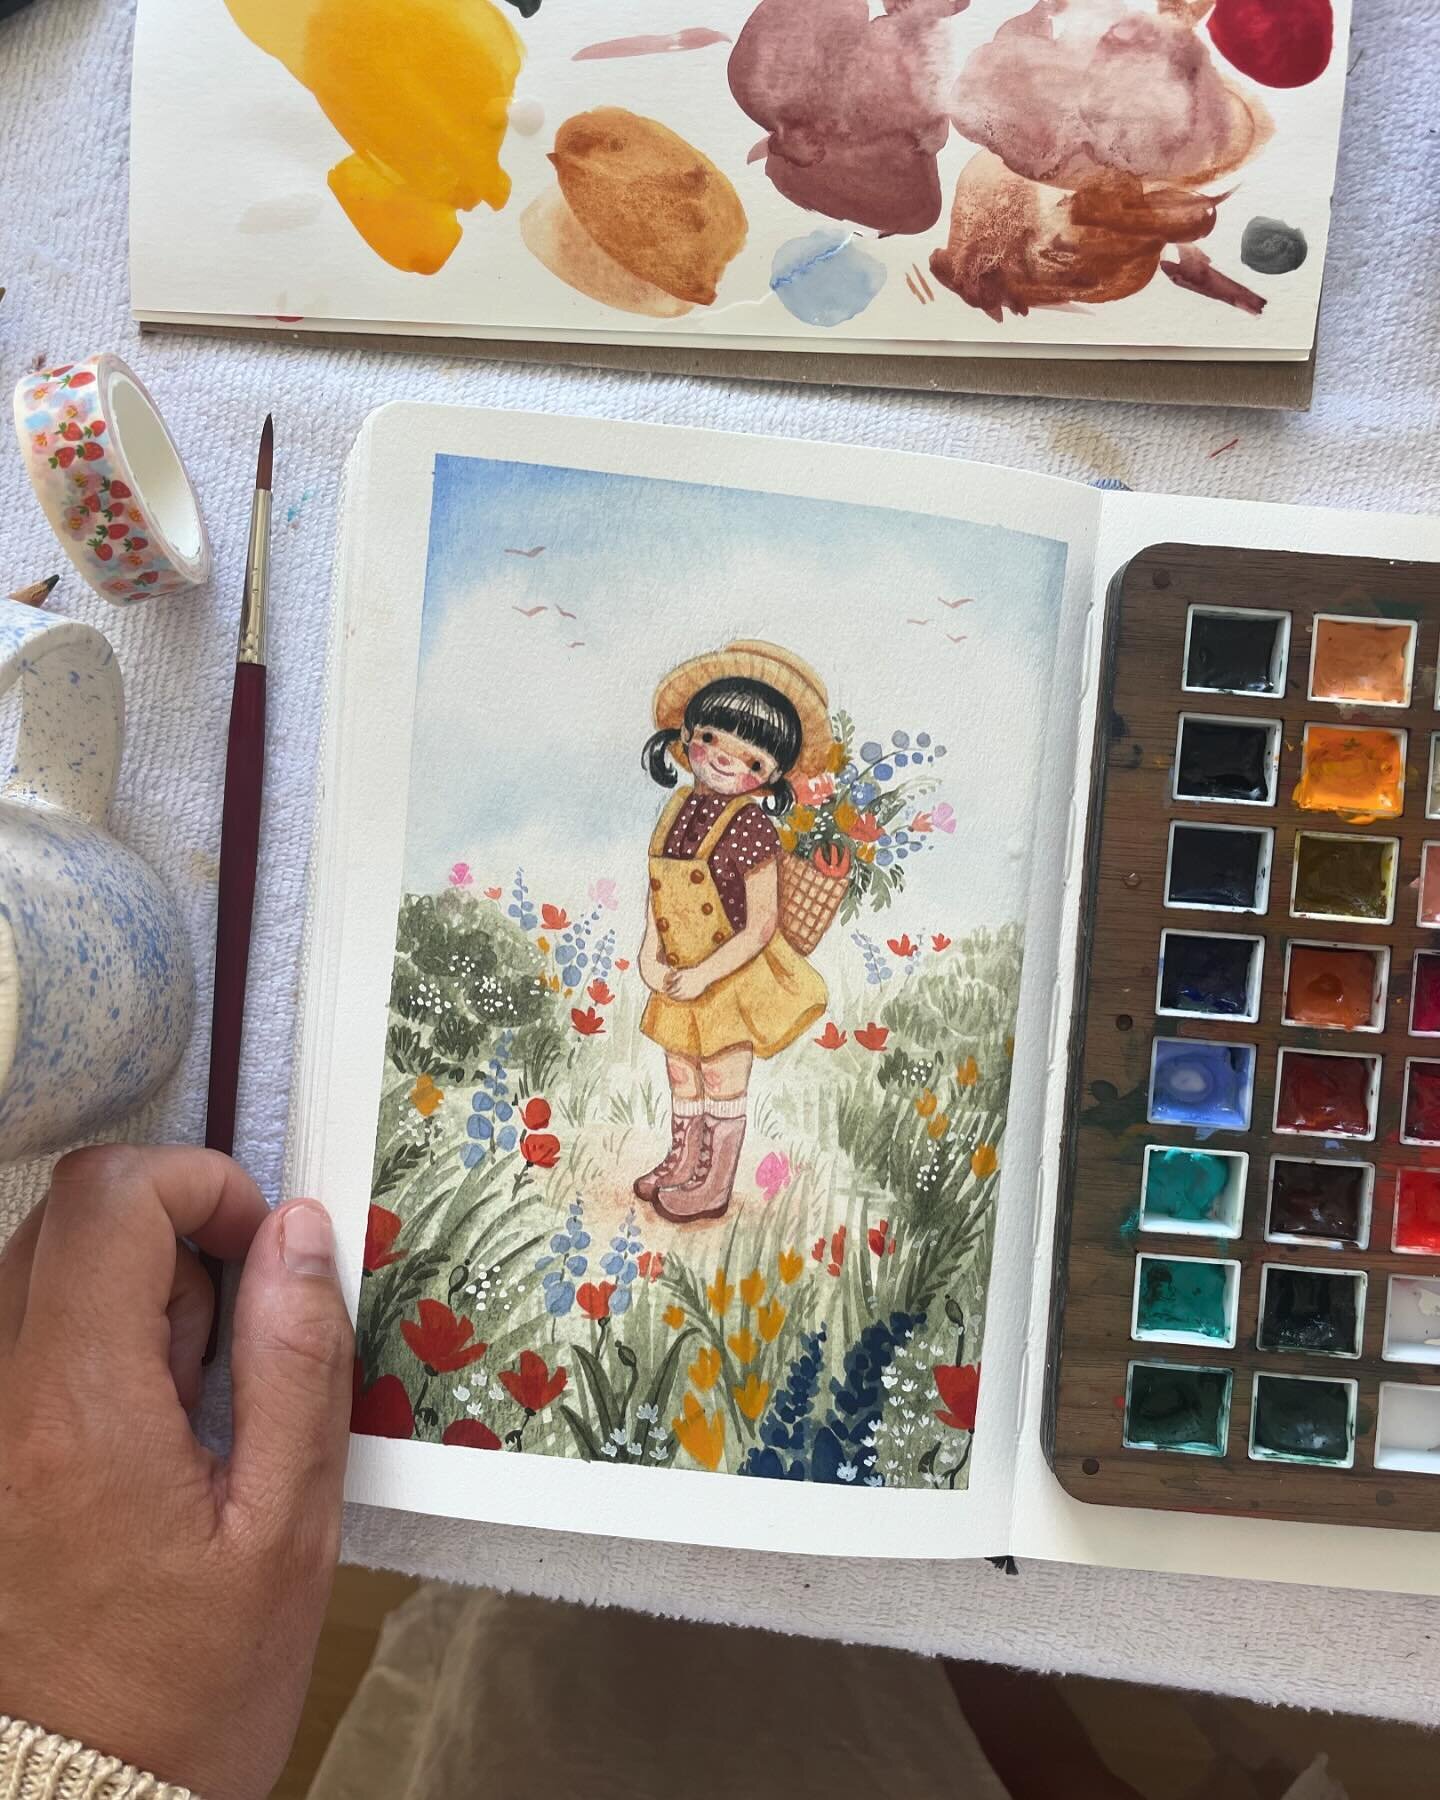 I have been enjoying exploring watercolors more! Now that I am done illustrating A Thank You Letter To My Homeschool I have more time to paint and experiment freely and I can share the work I do with you ☺️ stay tune for the cover reveal though of A 